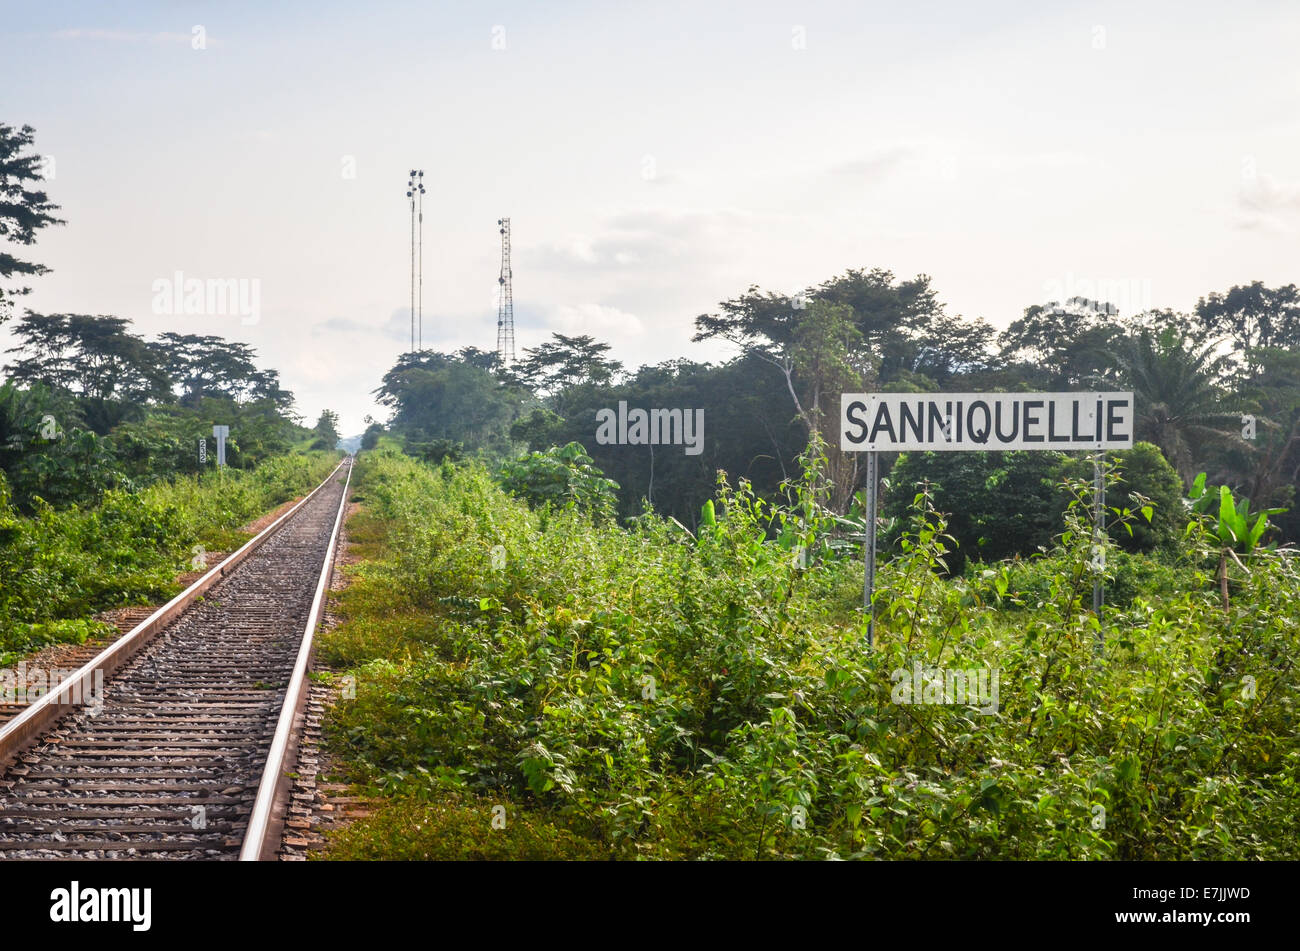 The Sanniquellie train station in Nimba County, northern Liberia, with renovated railway enabling ArcelorMittal's iron mining Stock Photo